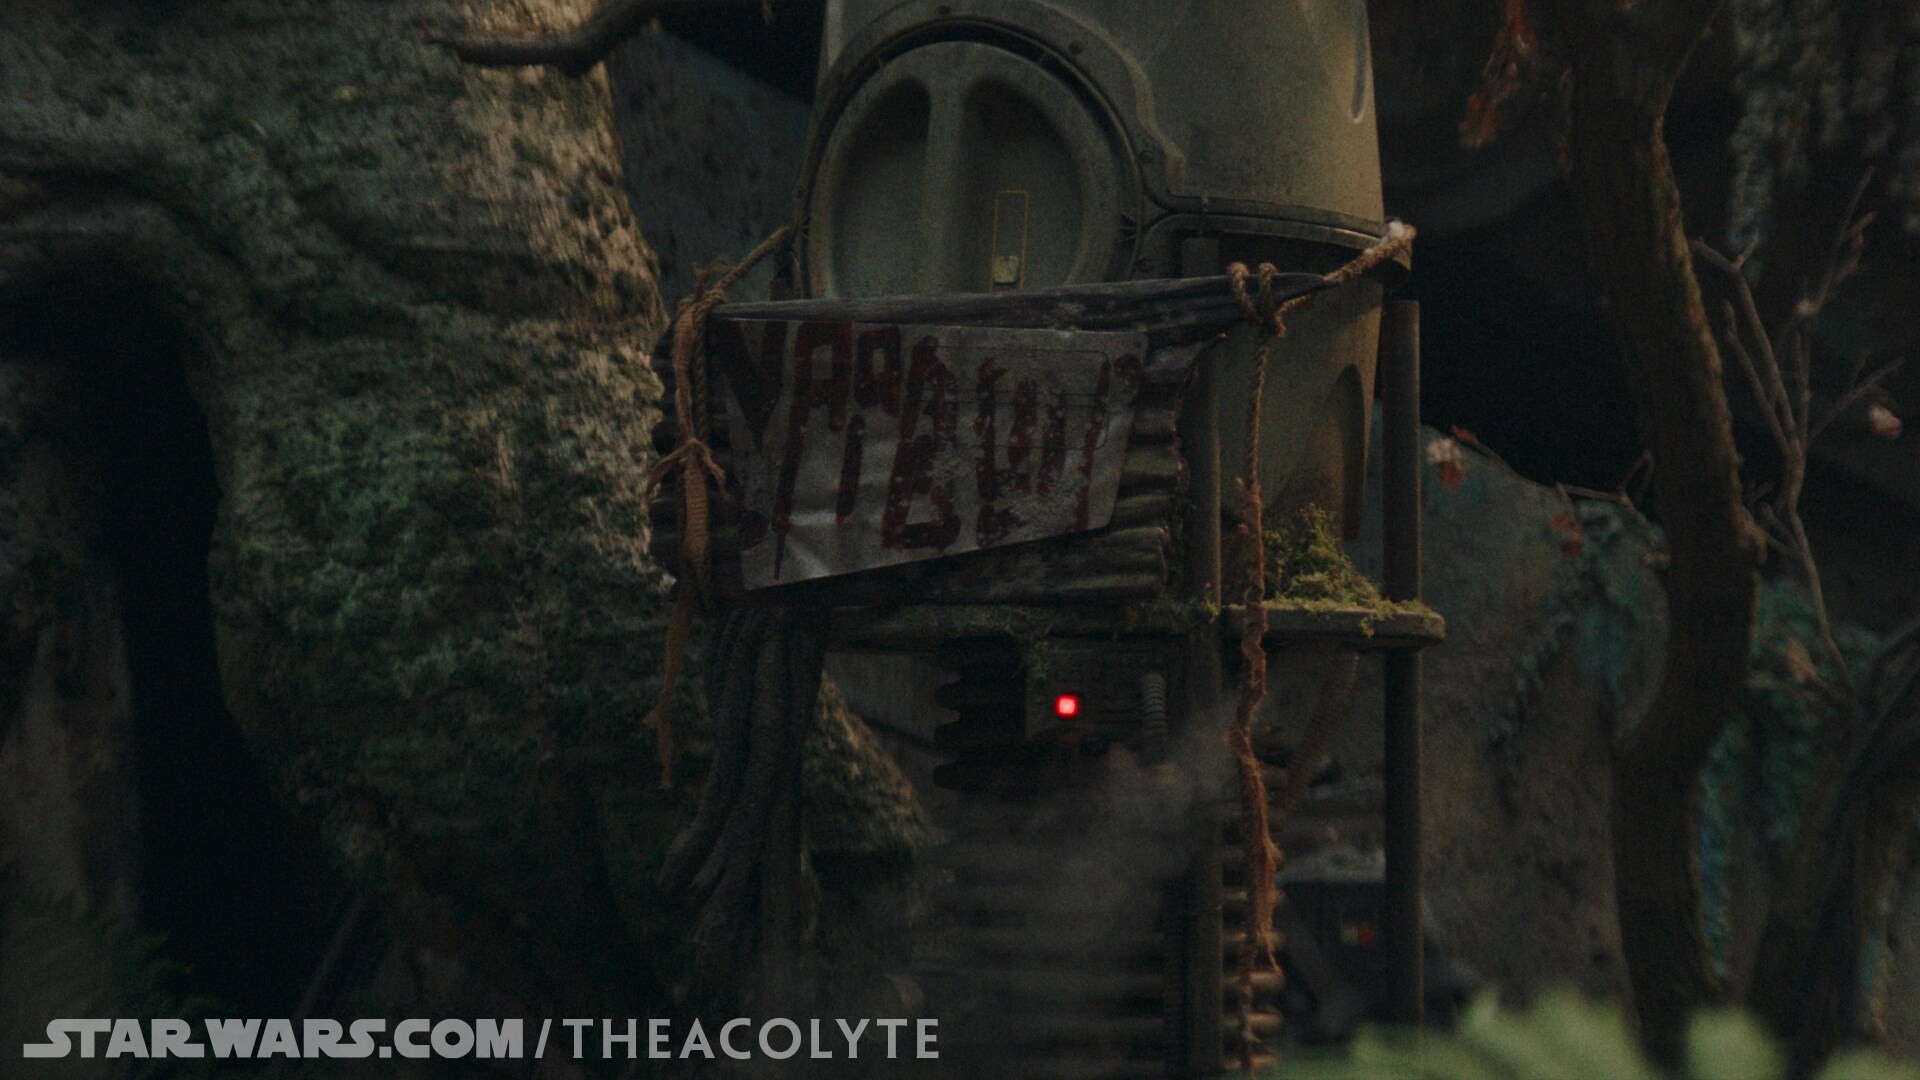 A sign on Kelnacca's shelter says "Keep Out" in Shyriiwook.